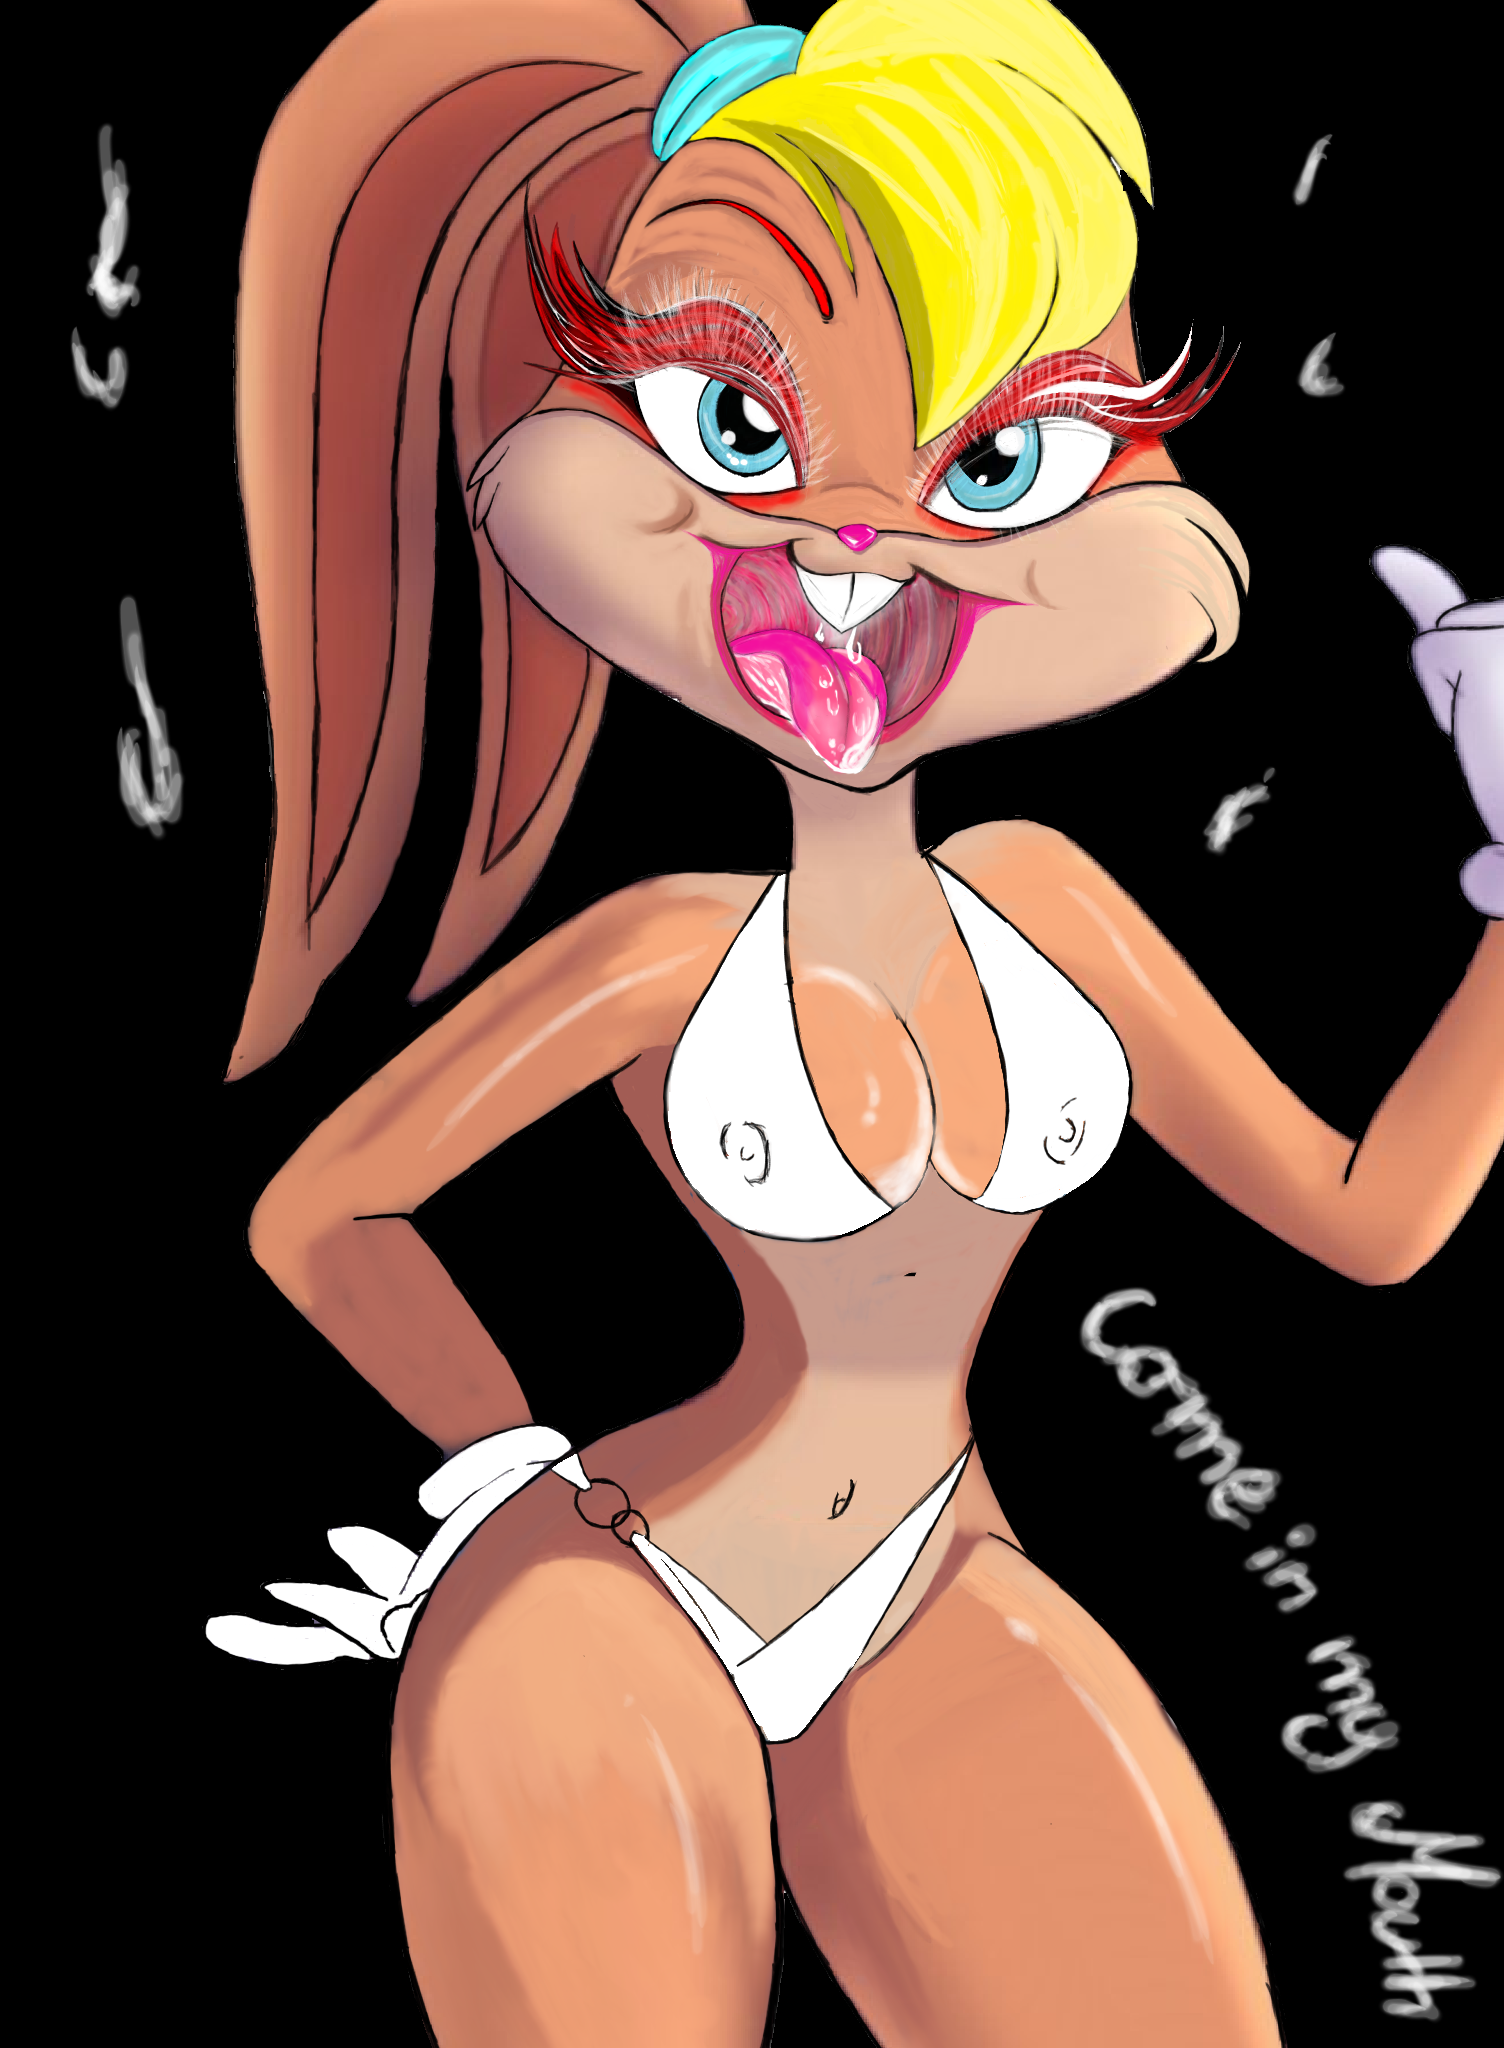 daniel dam recommends Lola Bunny And Rule 34